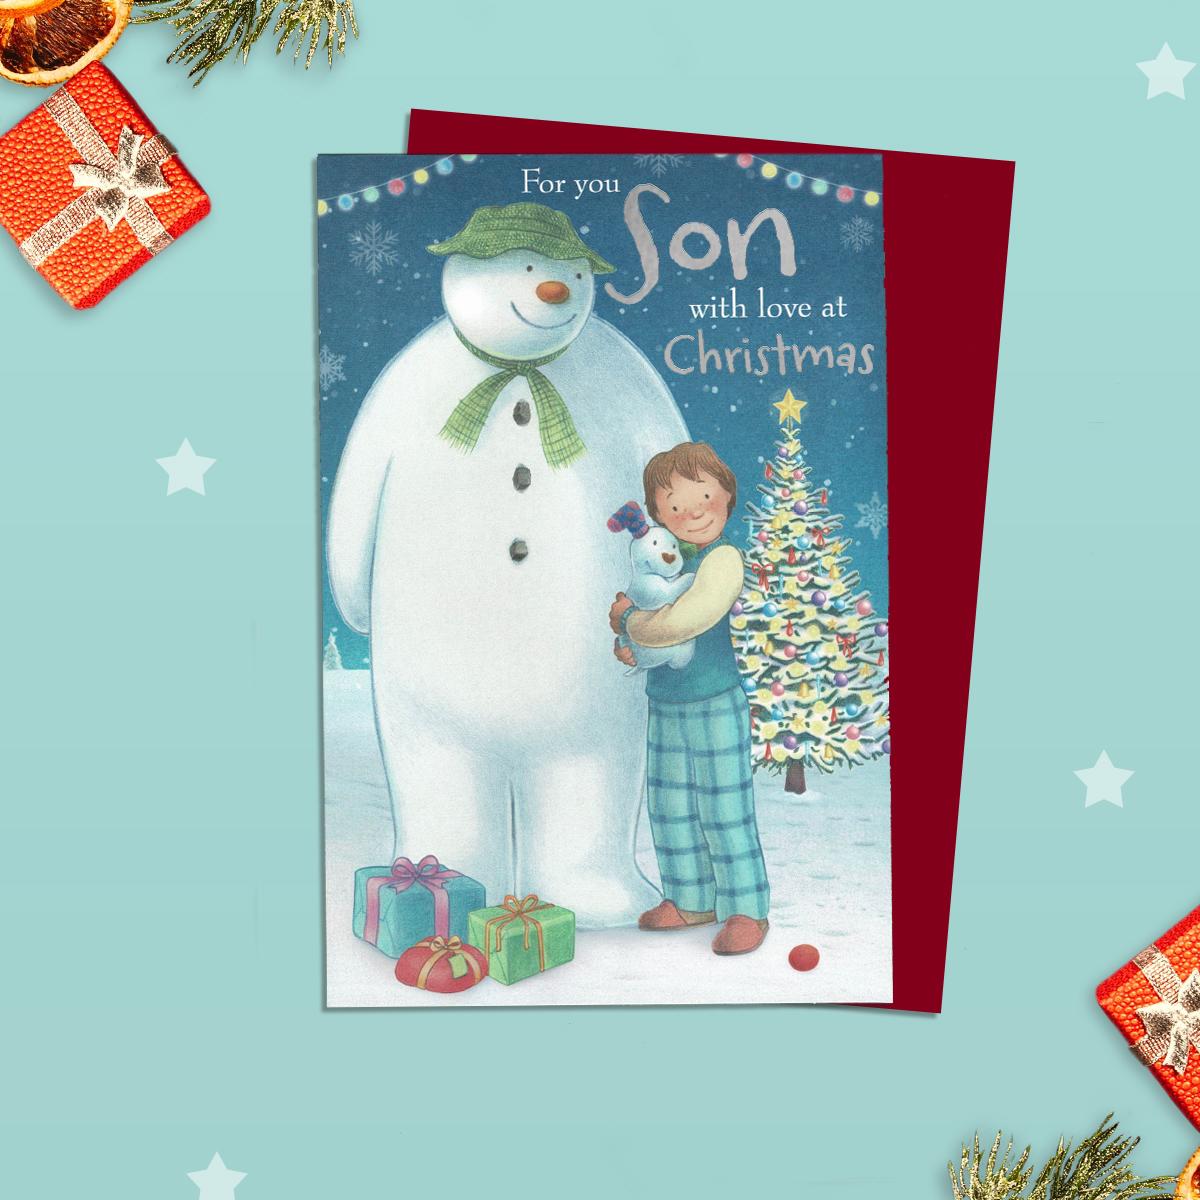 Son The Snowman Christmas Card Alongside Its Red Envelope